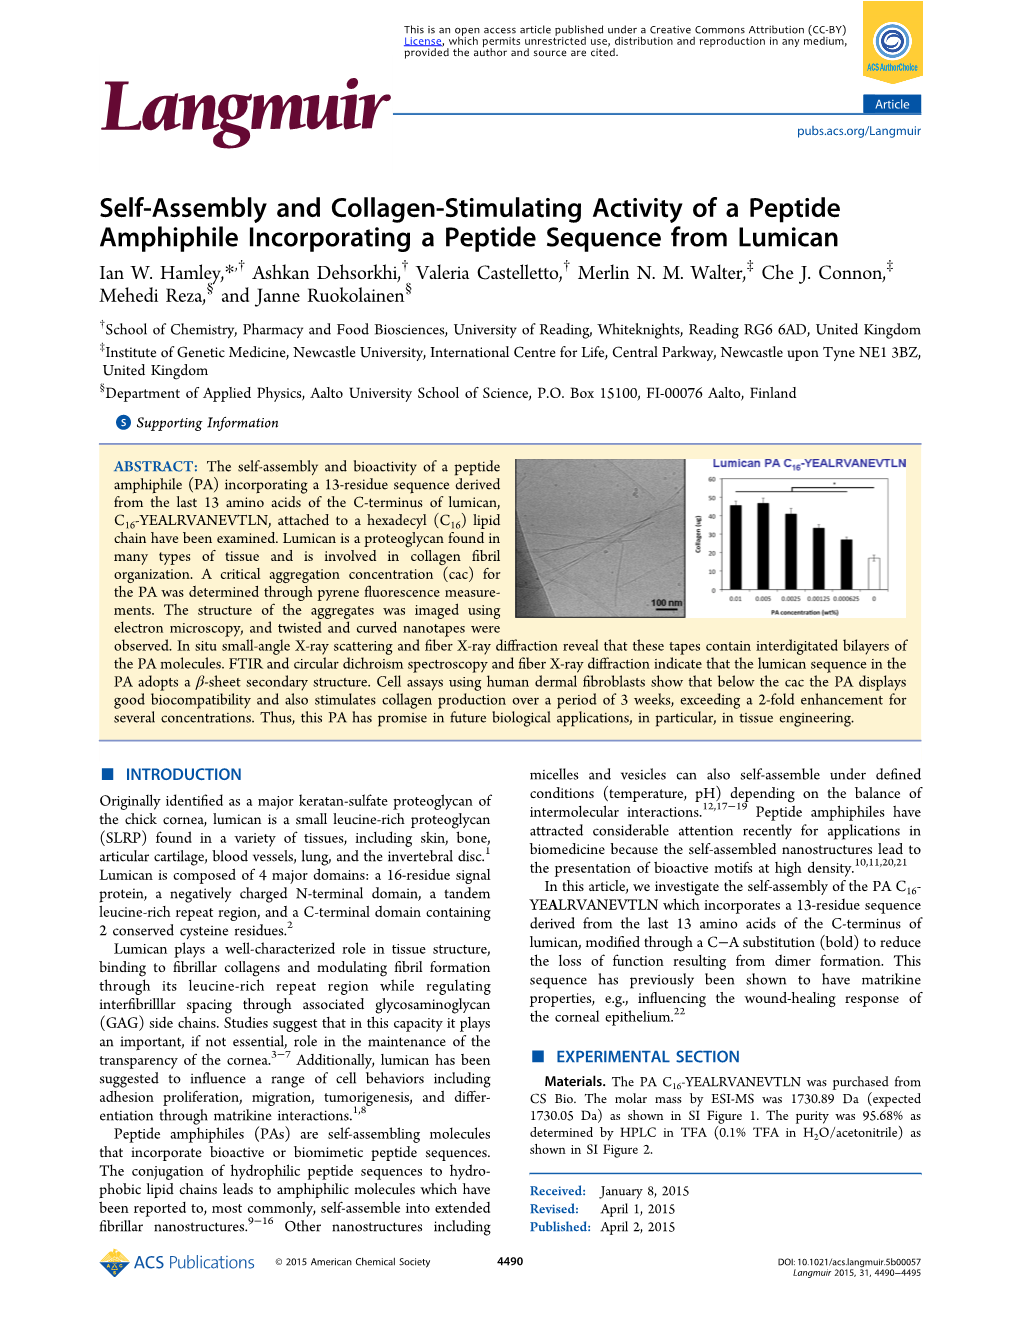 Self-Assembly and Collagen-Stimulating Activity of a Peptide Amphiphile Incorporating a Peptide Sequence from Lumican Ian W